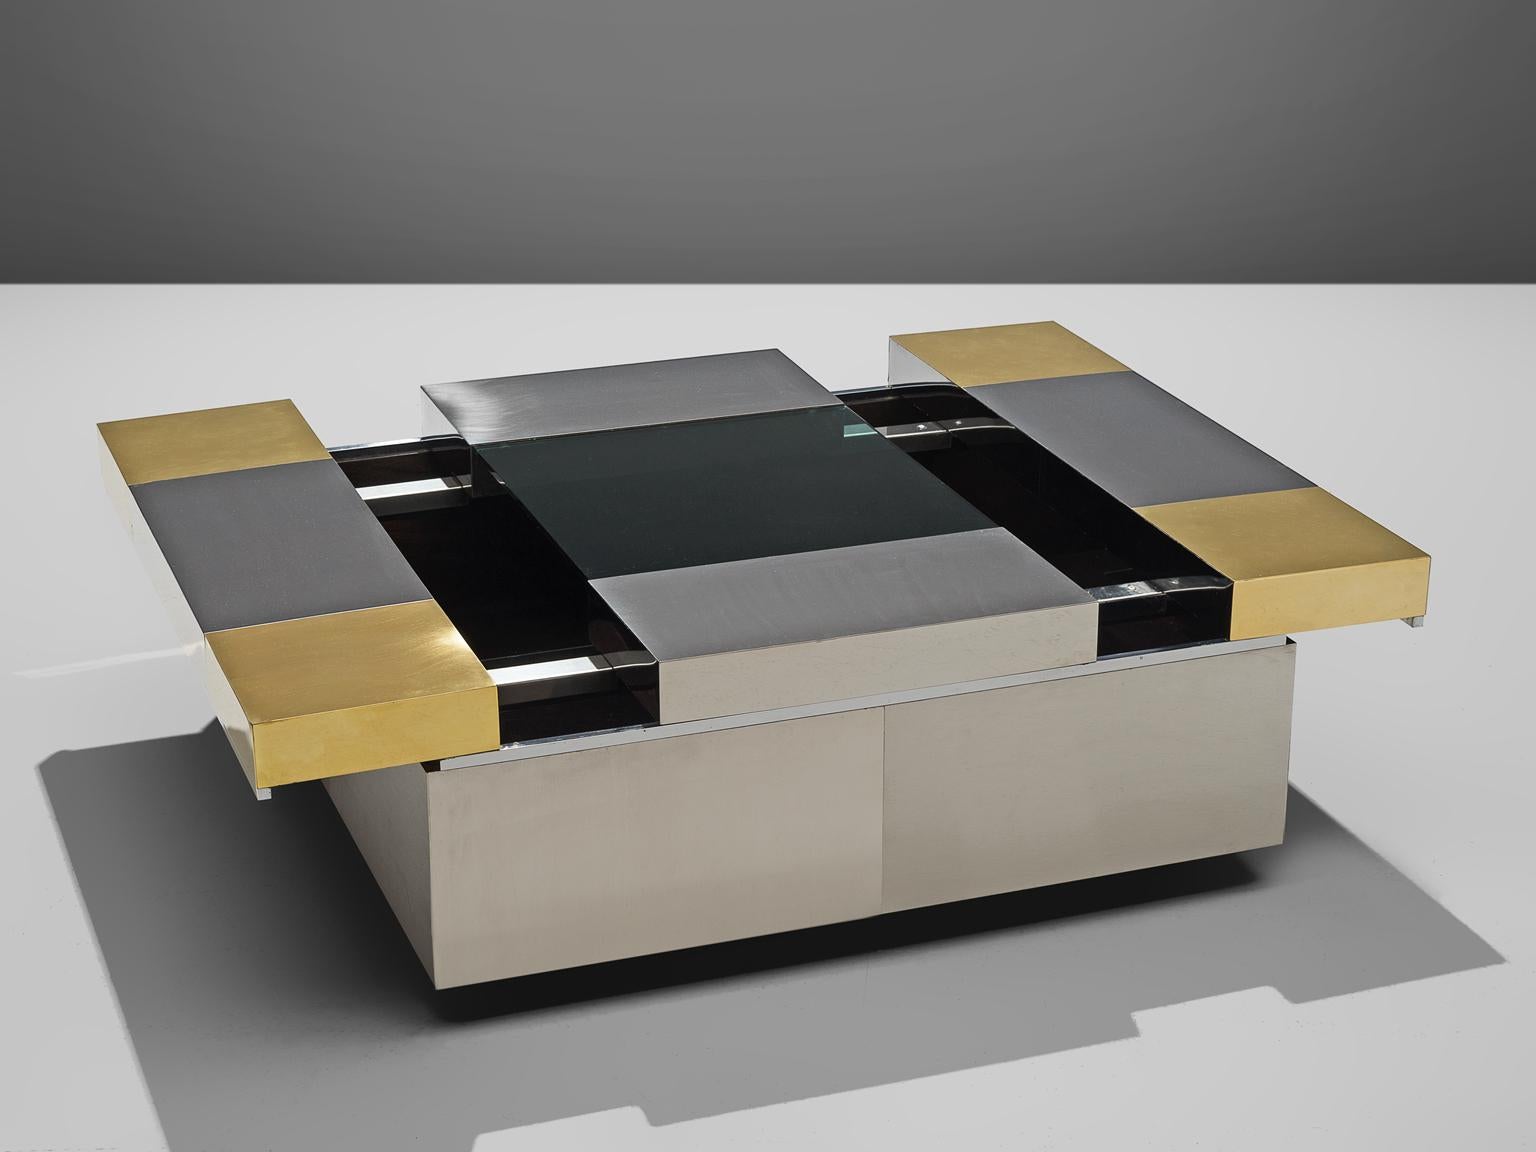 Coffee table, steel and brass, 1970s, Italy.

This coffee table features particular design aesthetics of postmodern Italian design that features traits of the design of Gabriella Crespi. It features slick and clean look thanks to the combination